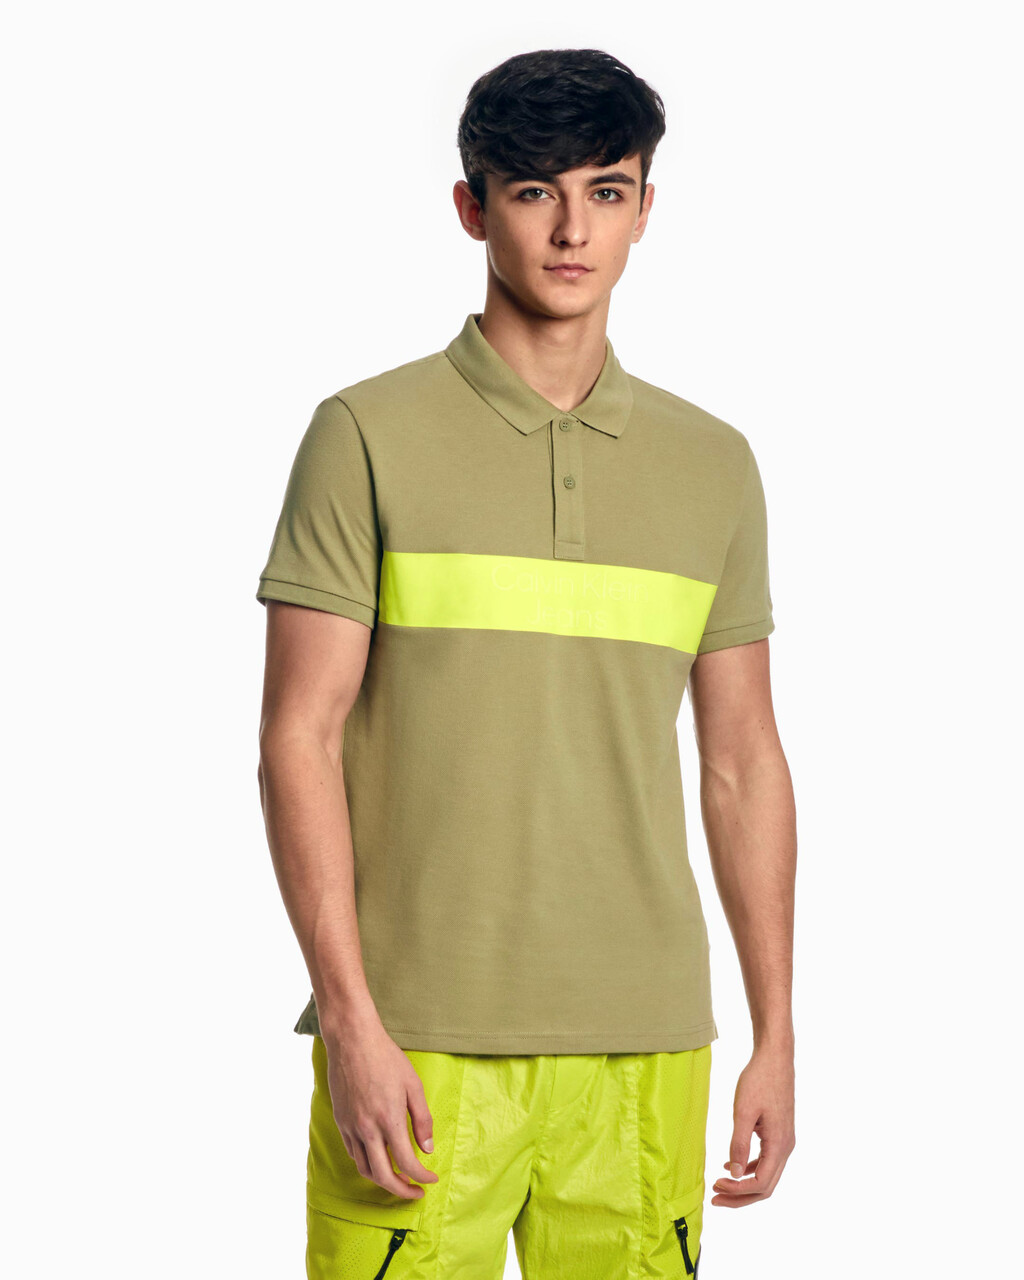 GLOW IN THE DARK INSTITUTIONAL POLO, Faded Olive, hi-res